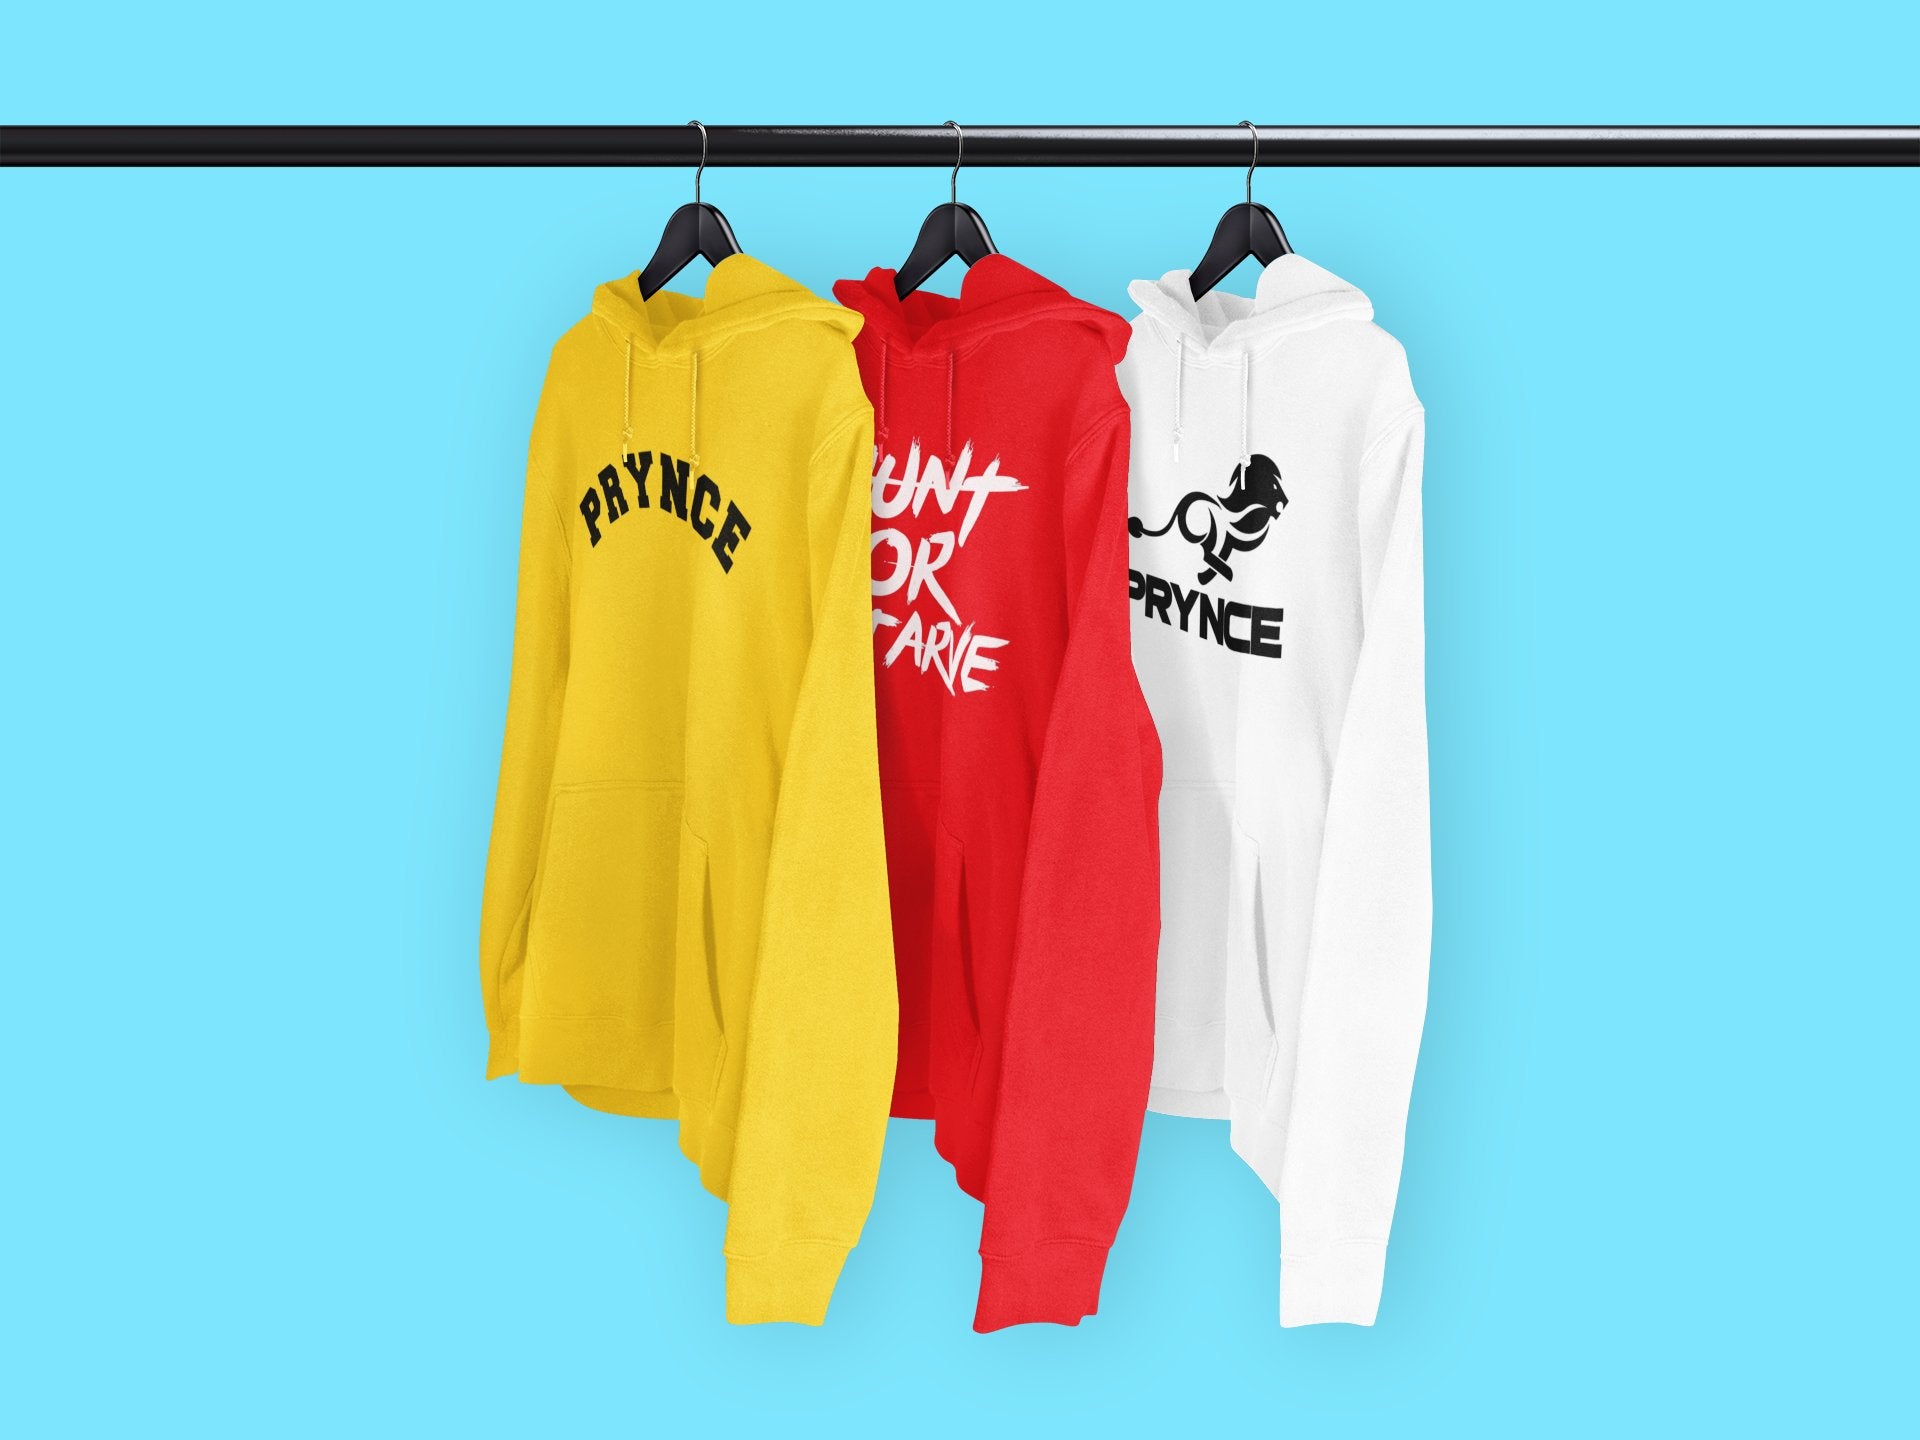 Prynce fashion collection hoodies 